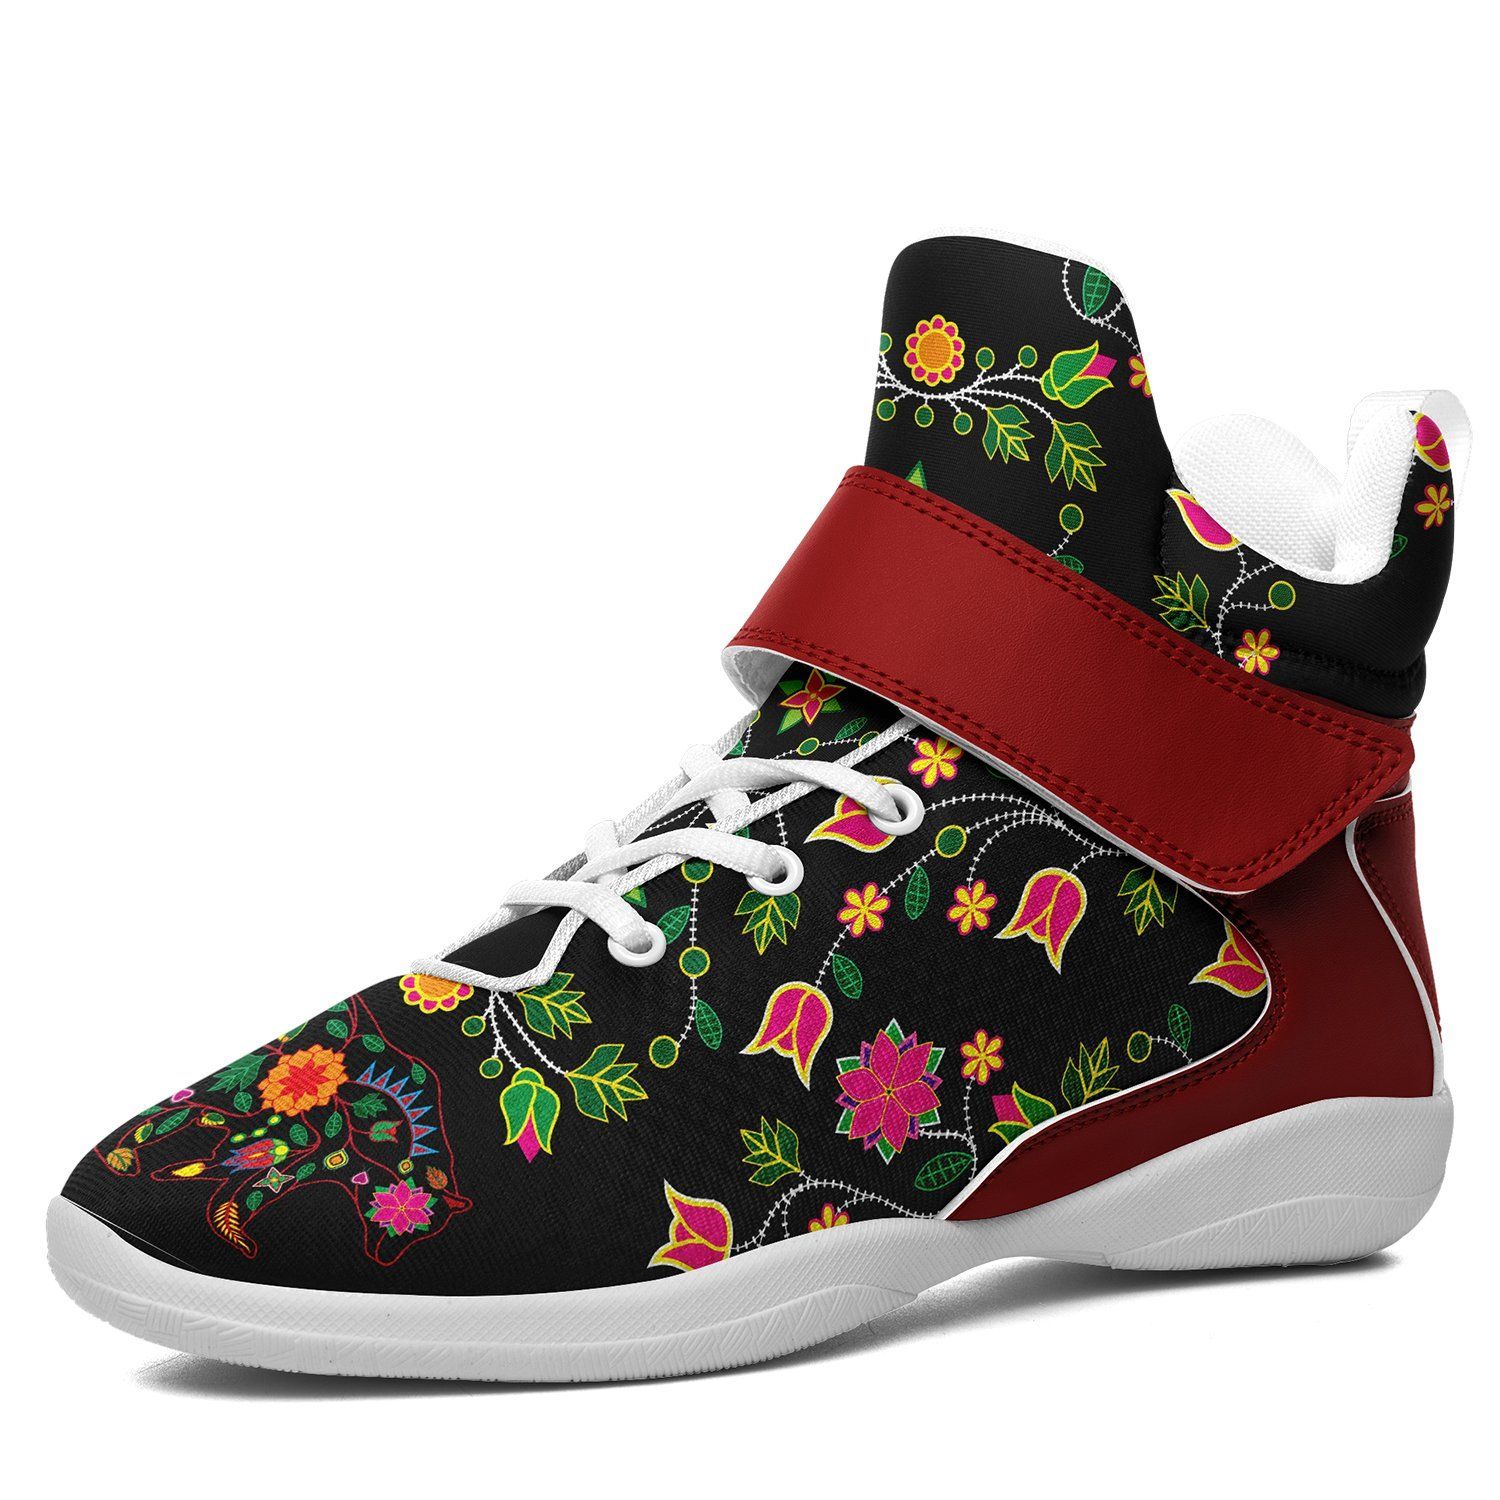 Floral Bear Ipottaa Basketball / Sport High Top Shoes - White Sole 49 Dzine US Men 7 / EUR 40 White Sole with Dark Red Strap 